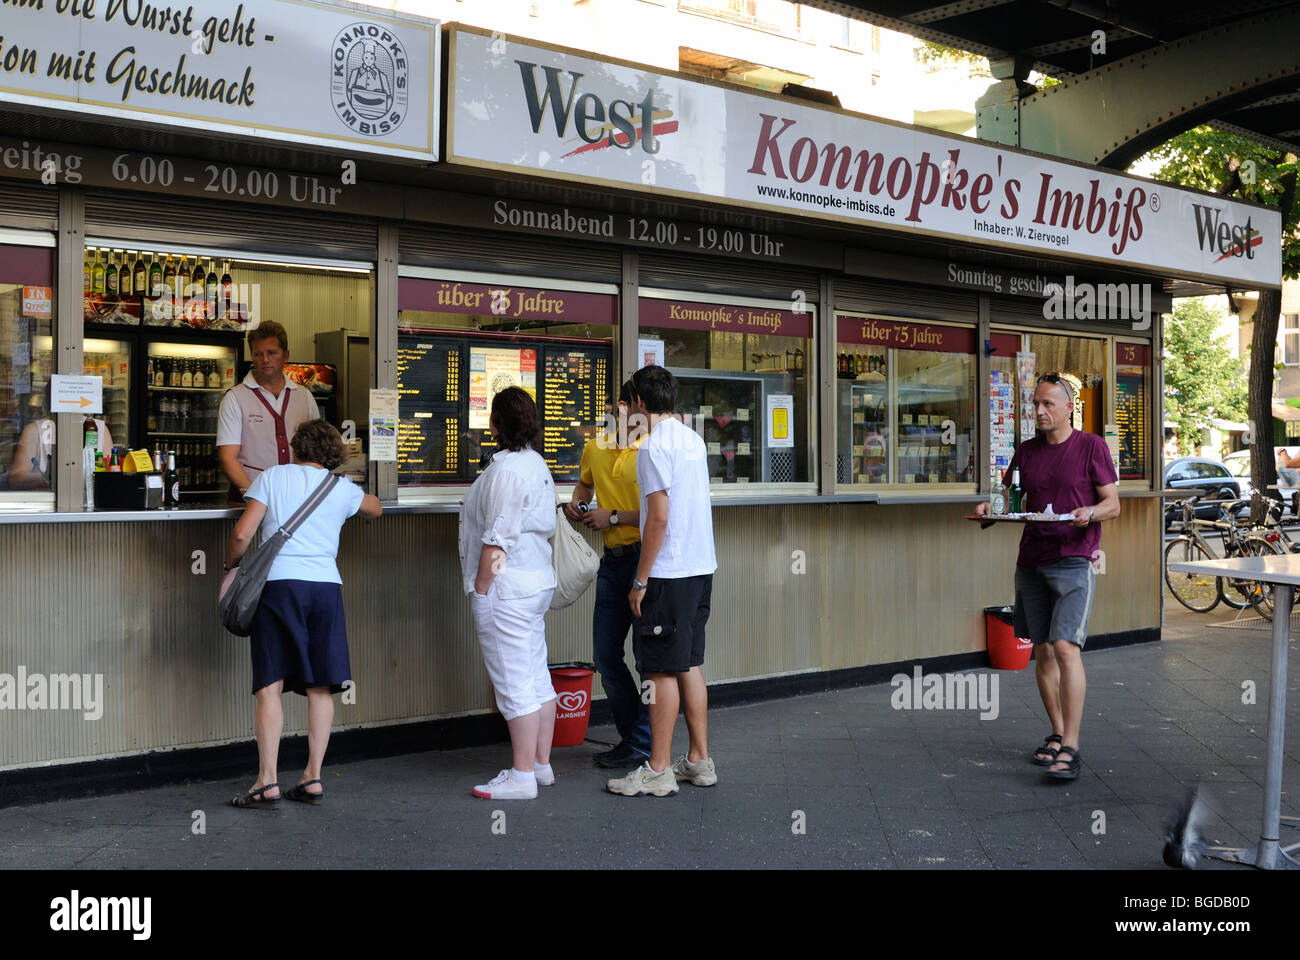 Konnopke's Imbiss, most famous and first Currywurst stand Schonhauser Allee 44,  Prenzlauer Berg district, Berlin. Germany. Stock Photo